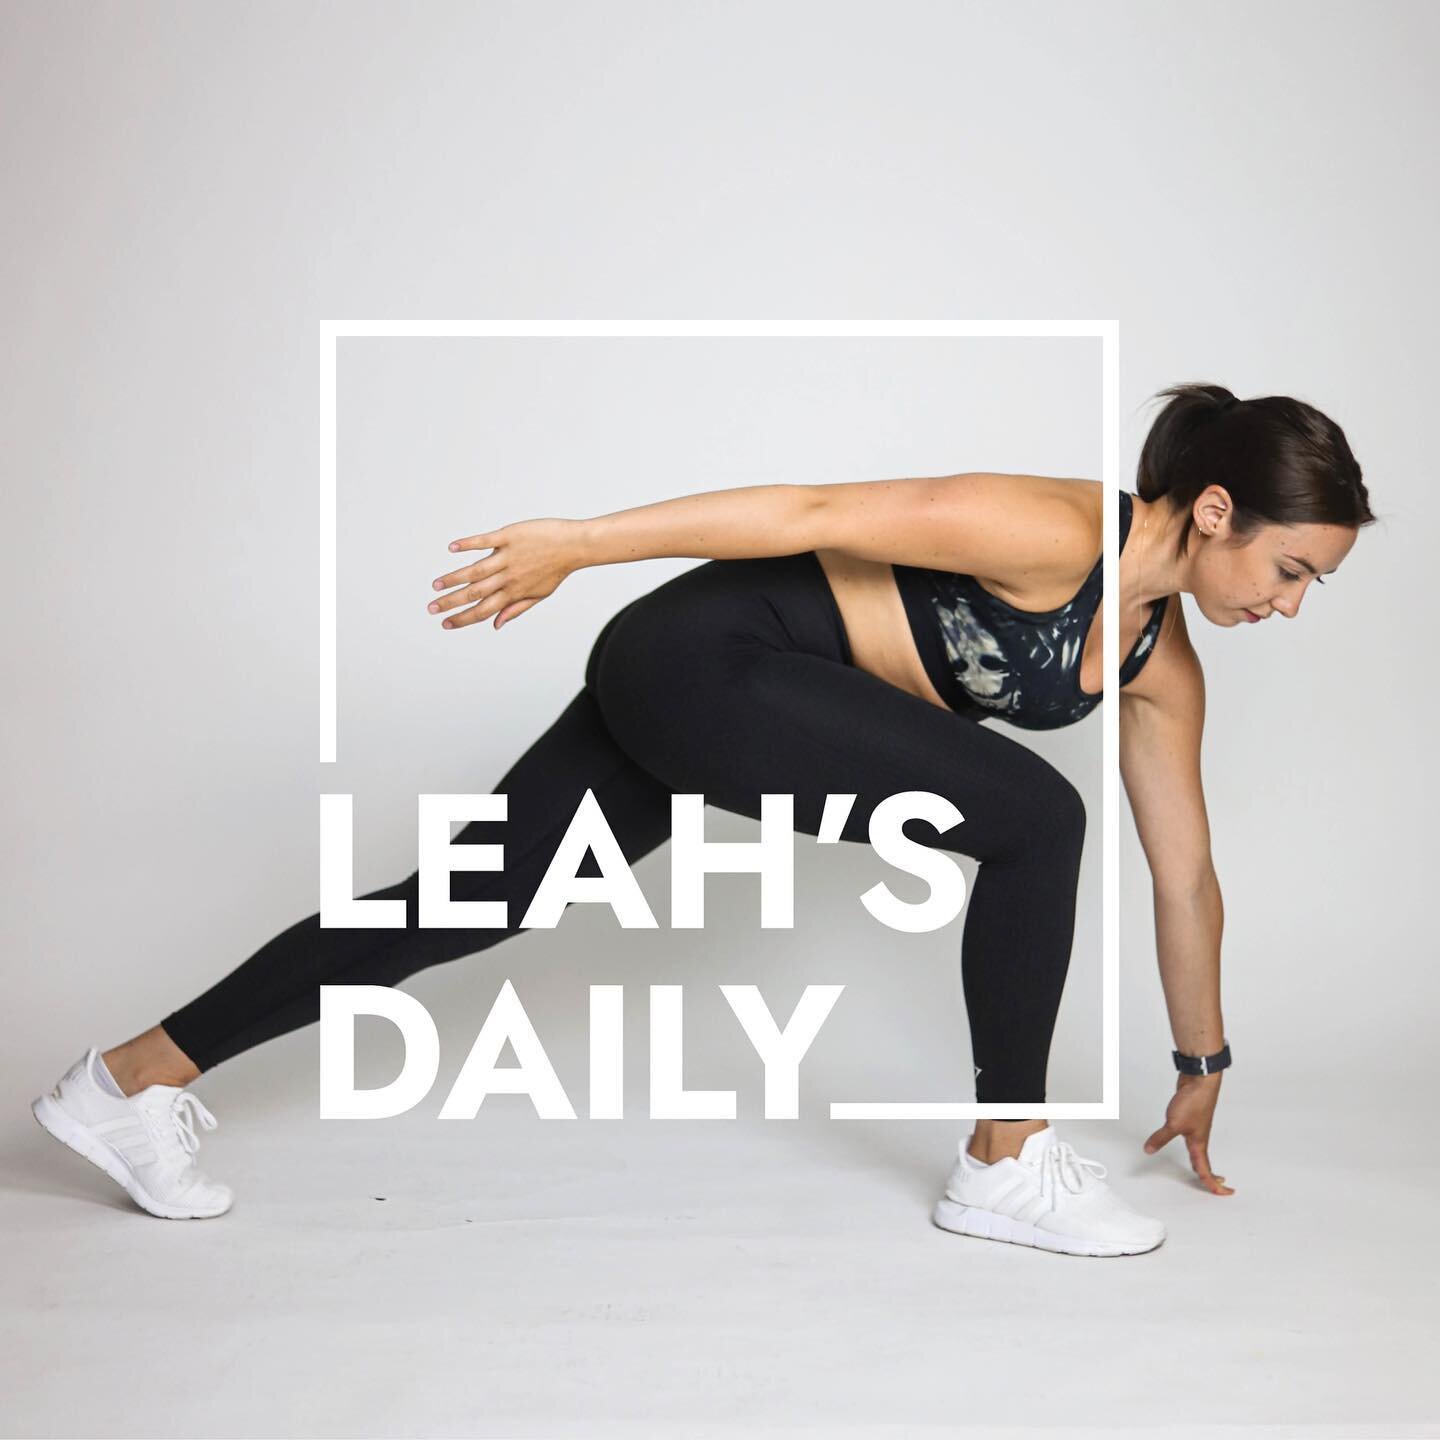 A bit more branding for Leah&rsquo;s Daily!